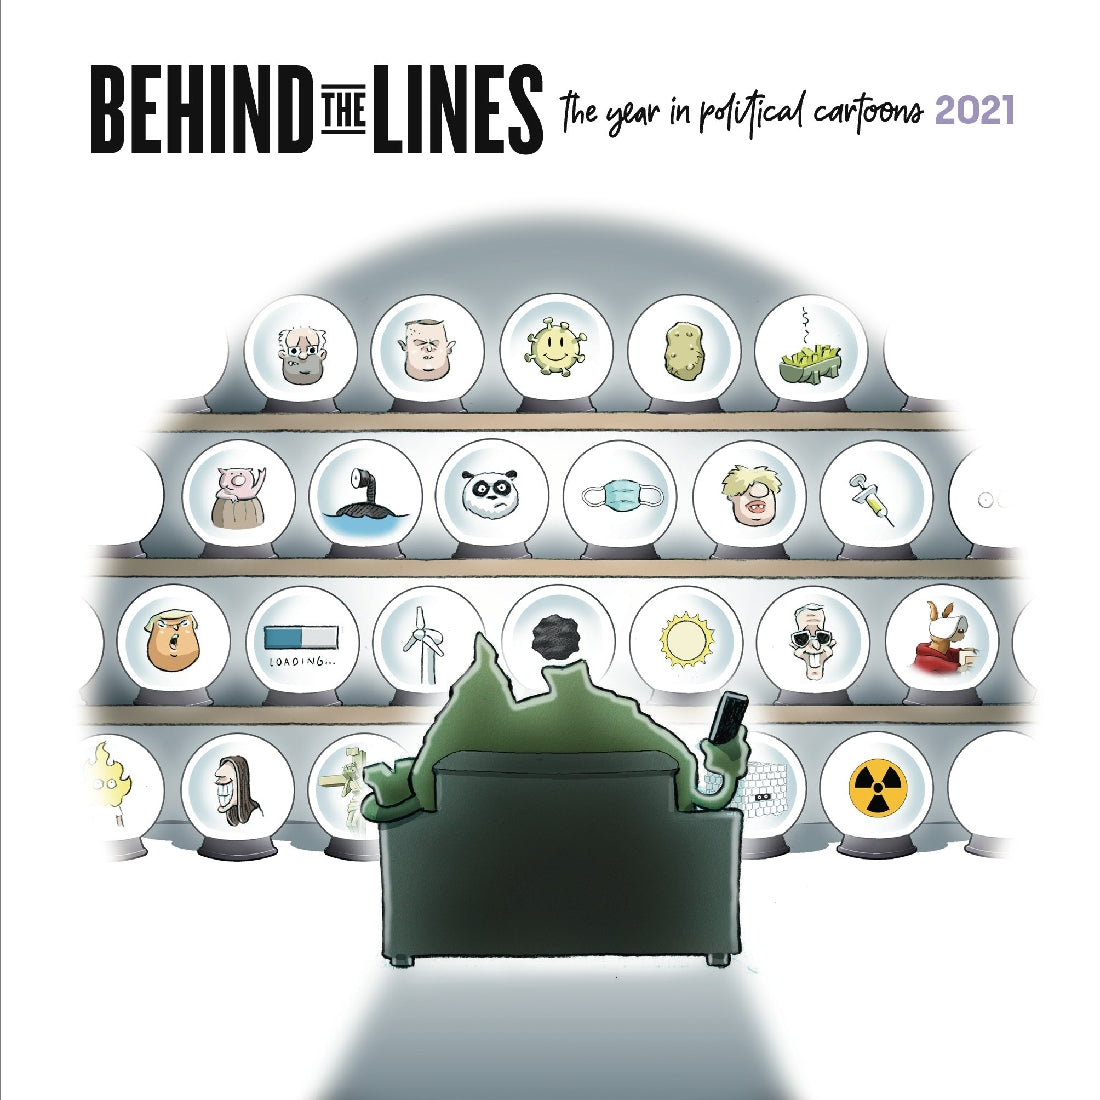 Behind the Lines: The Year in Political Cartoons 2021